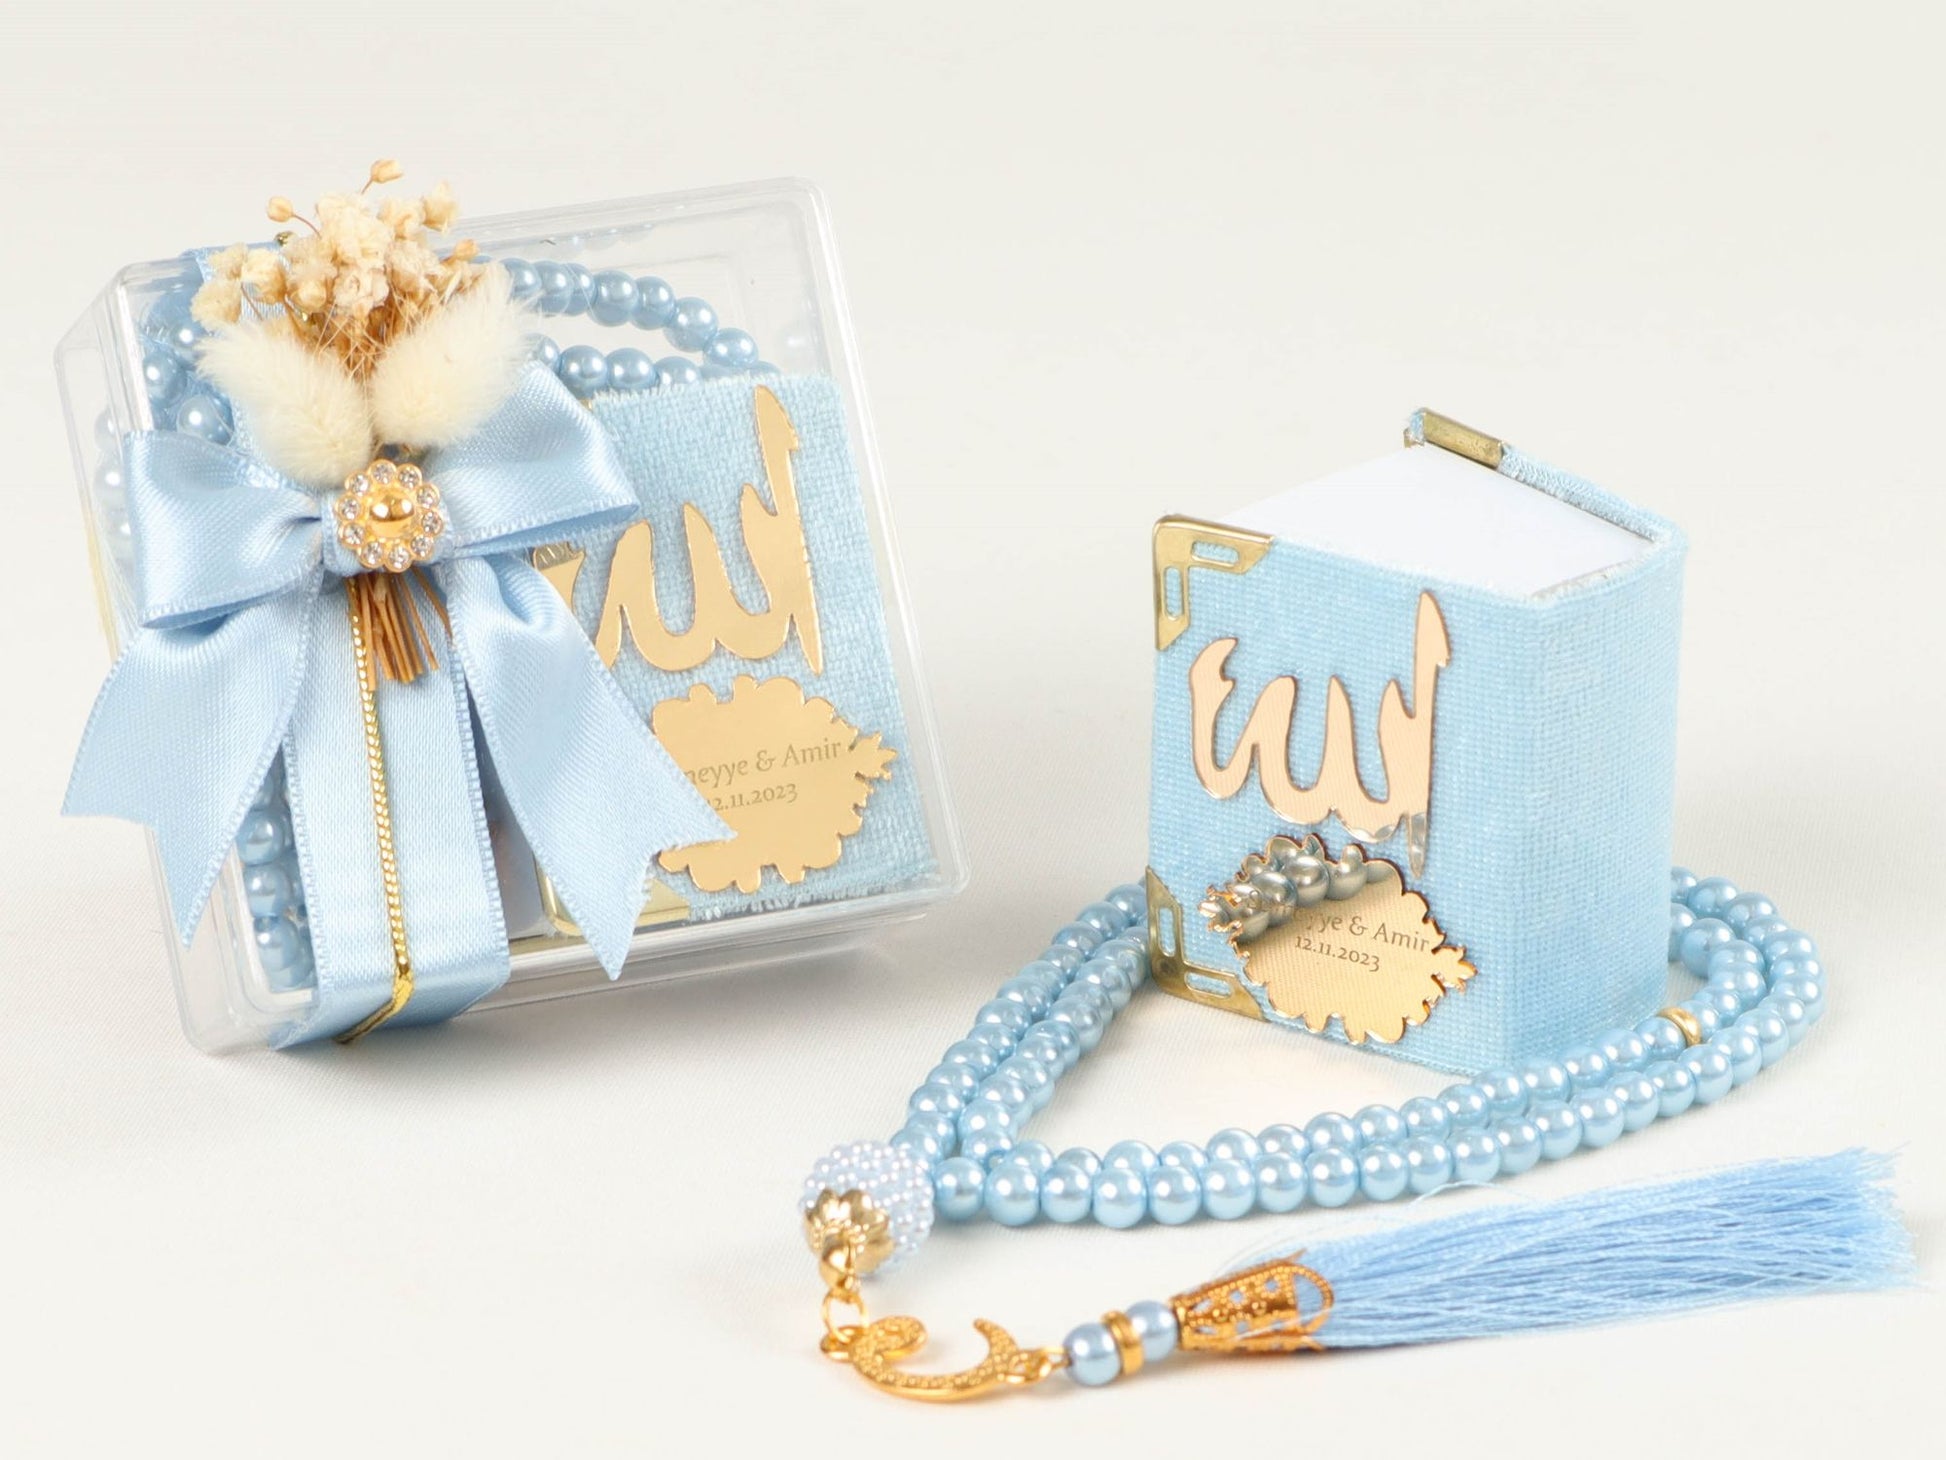 Personalized Mini Quran Prayer Beads Flower with Pearl Wedding Favor - Islamic Elite Favors is a handmade gift shop offering a wide variety of unique and personalized gifts for all occasions. Whether you're looking for the perfect Ramadan, Eid, Hajj, wedding gift or something special for a birthday, baby shower or anniversary, we have something for everyone. High quality, made with love.